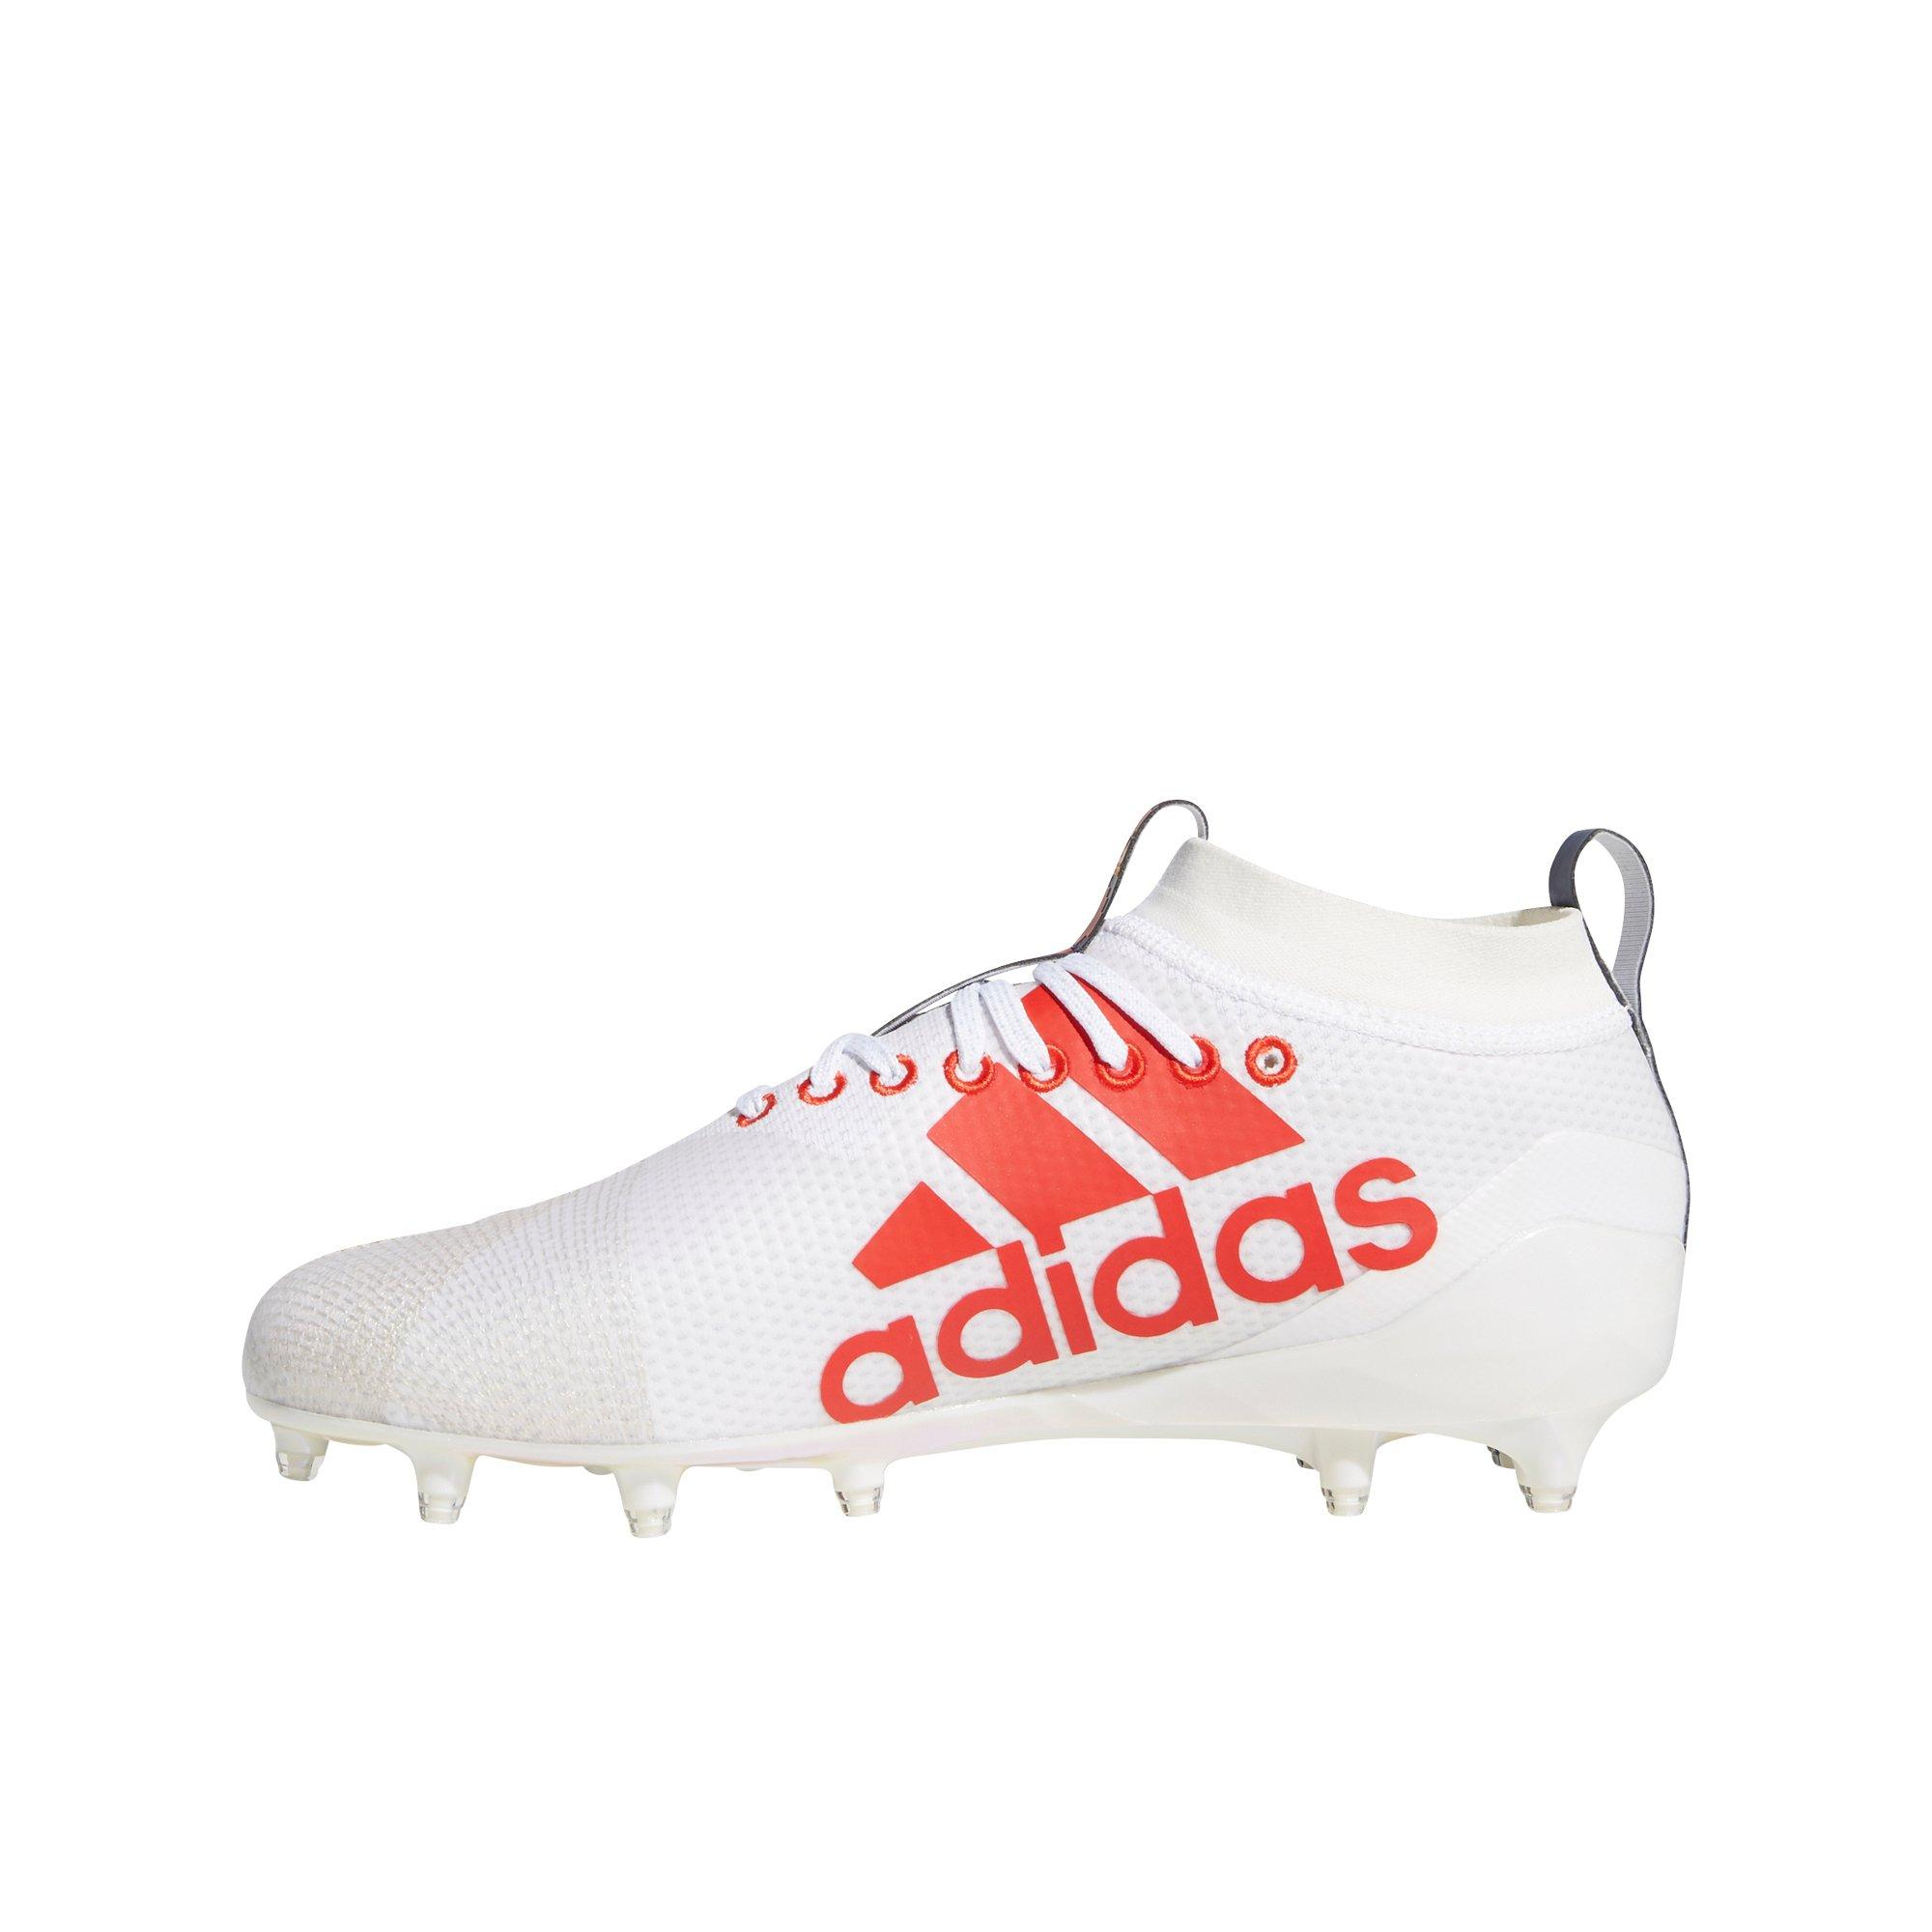 adidas football cleats red and white